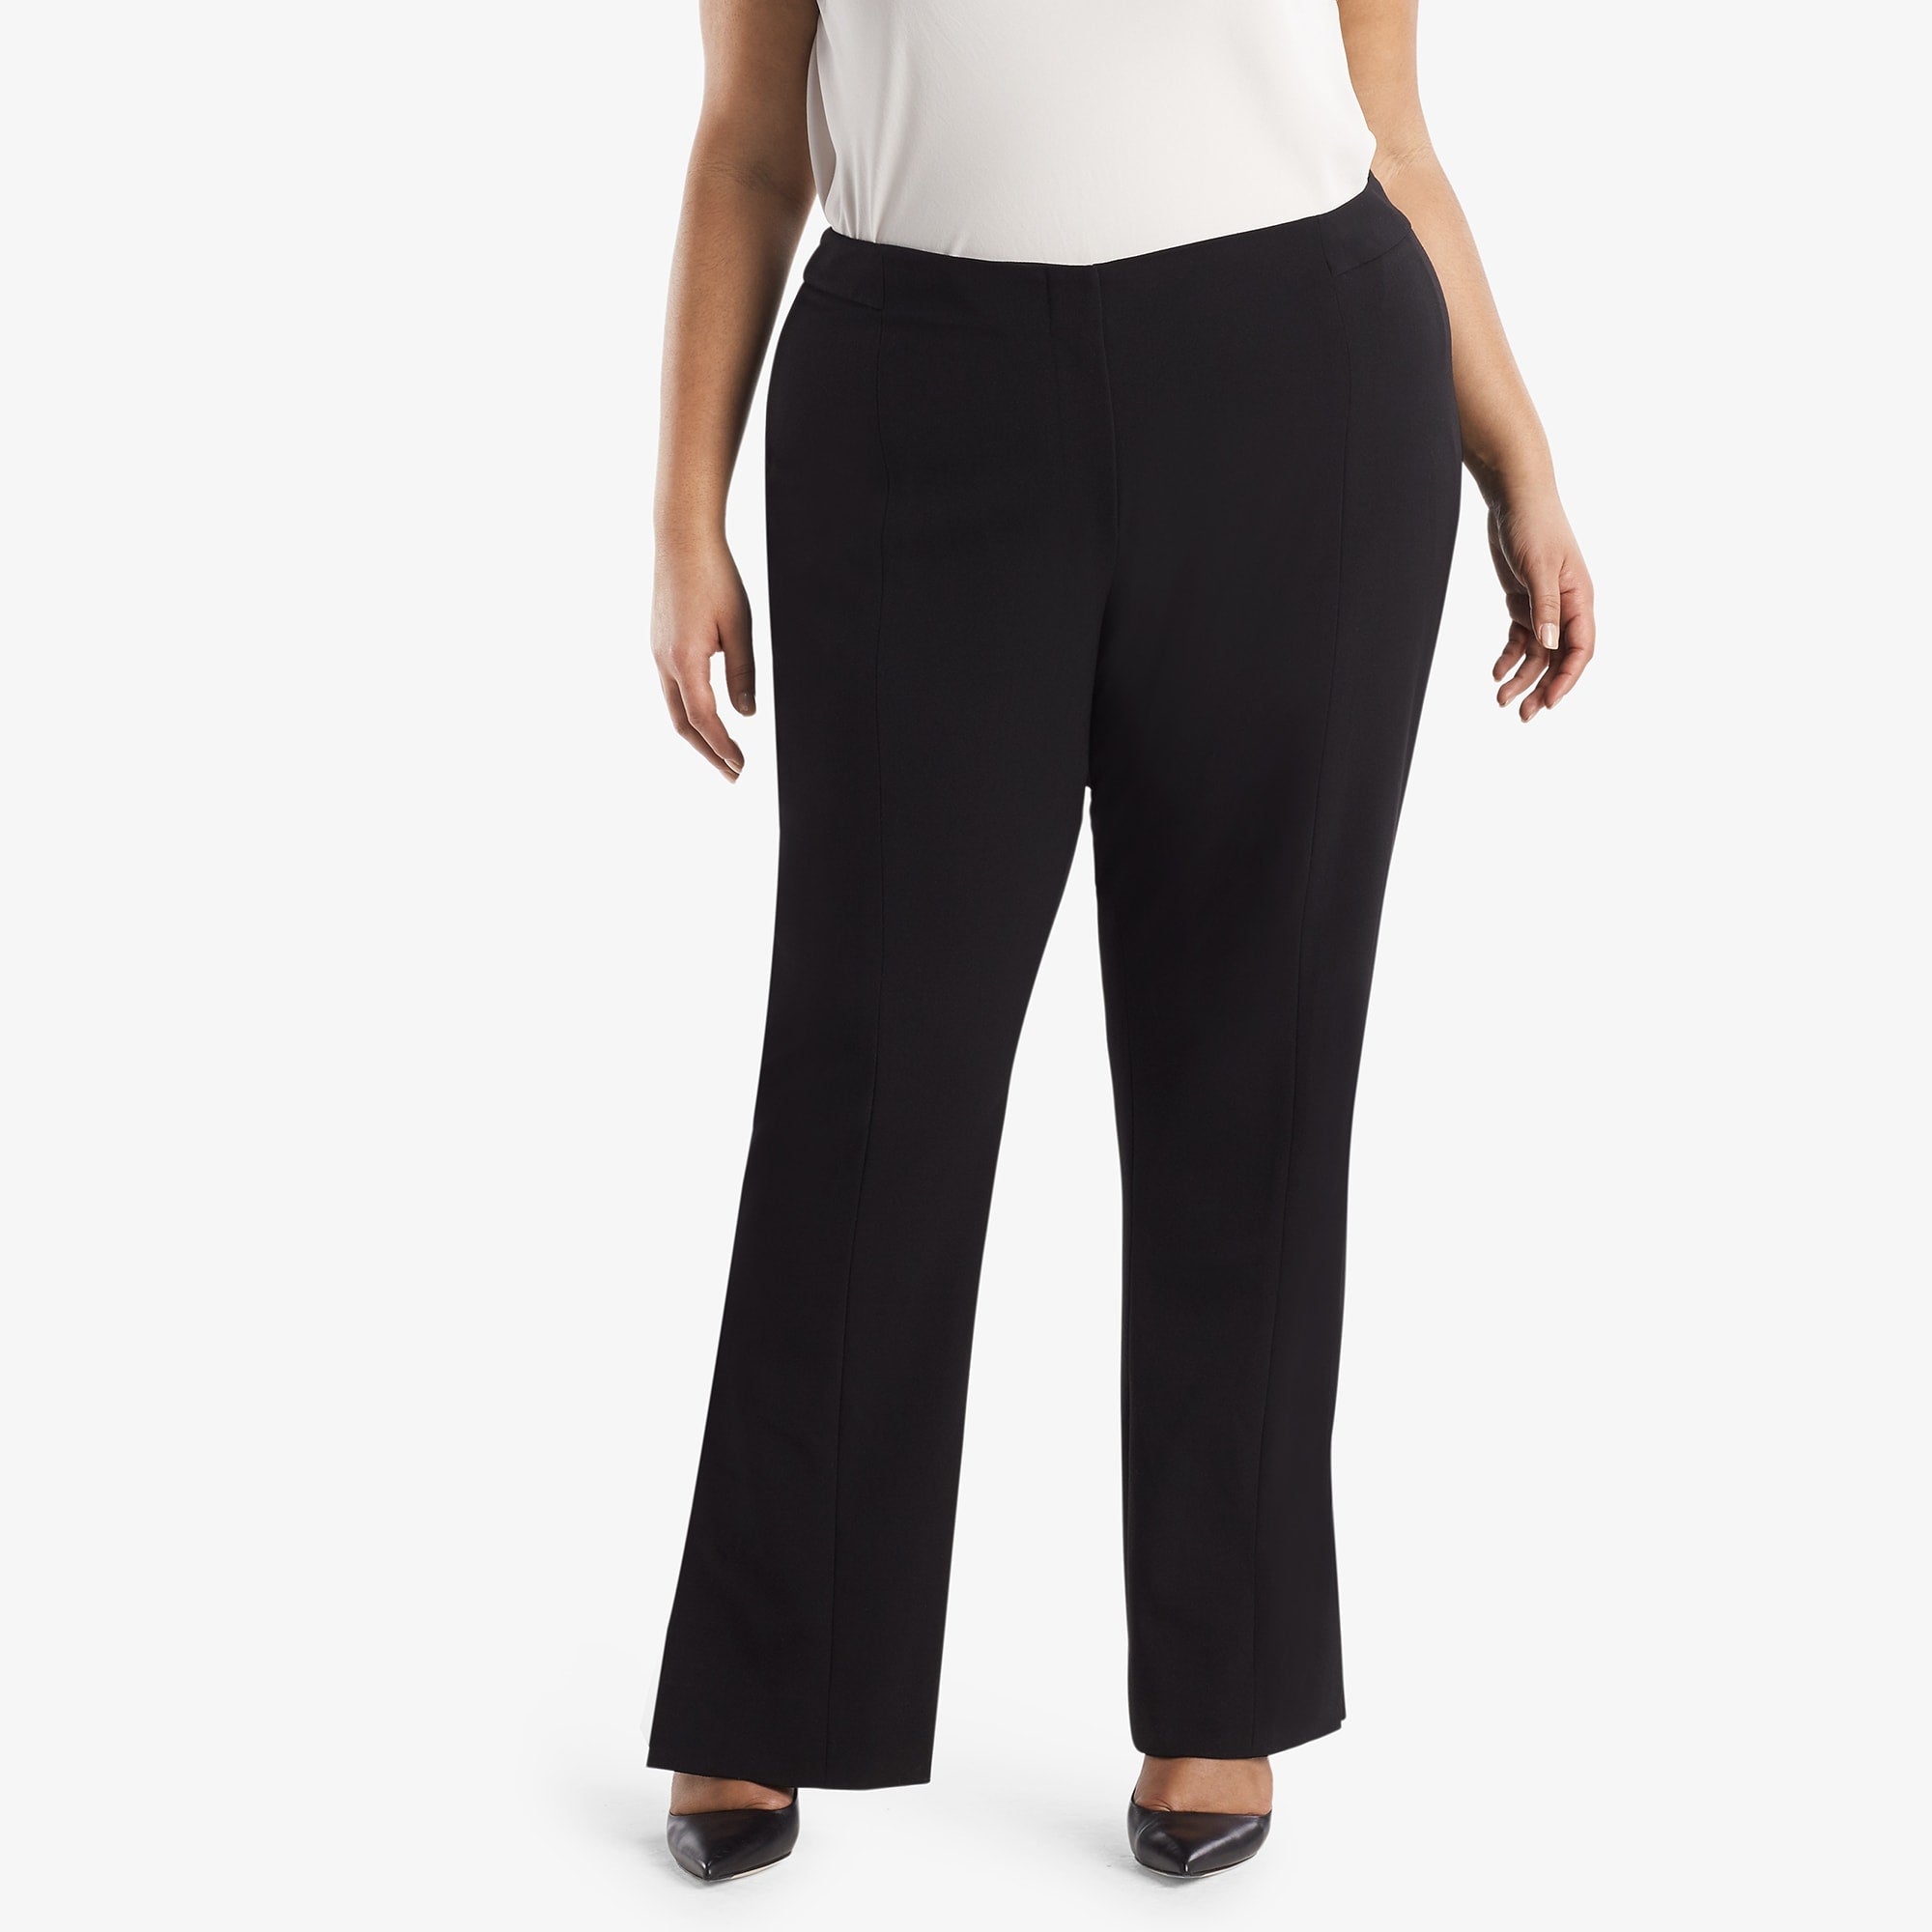 Front image of a woman standing wearing the Mercado Pant in black